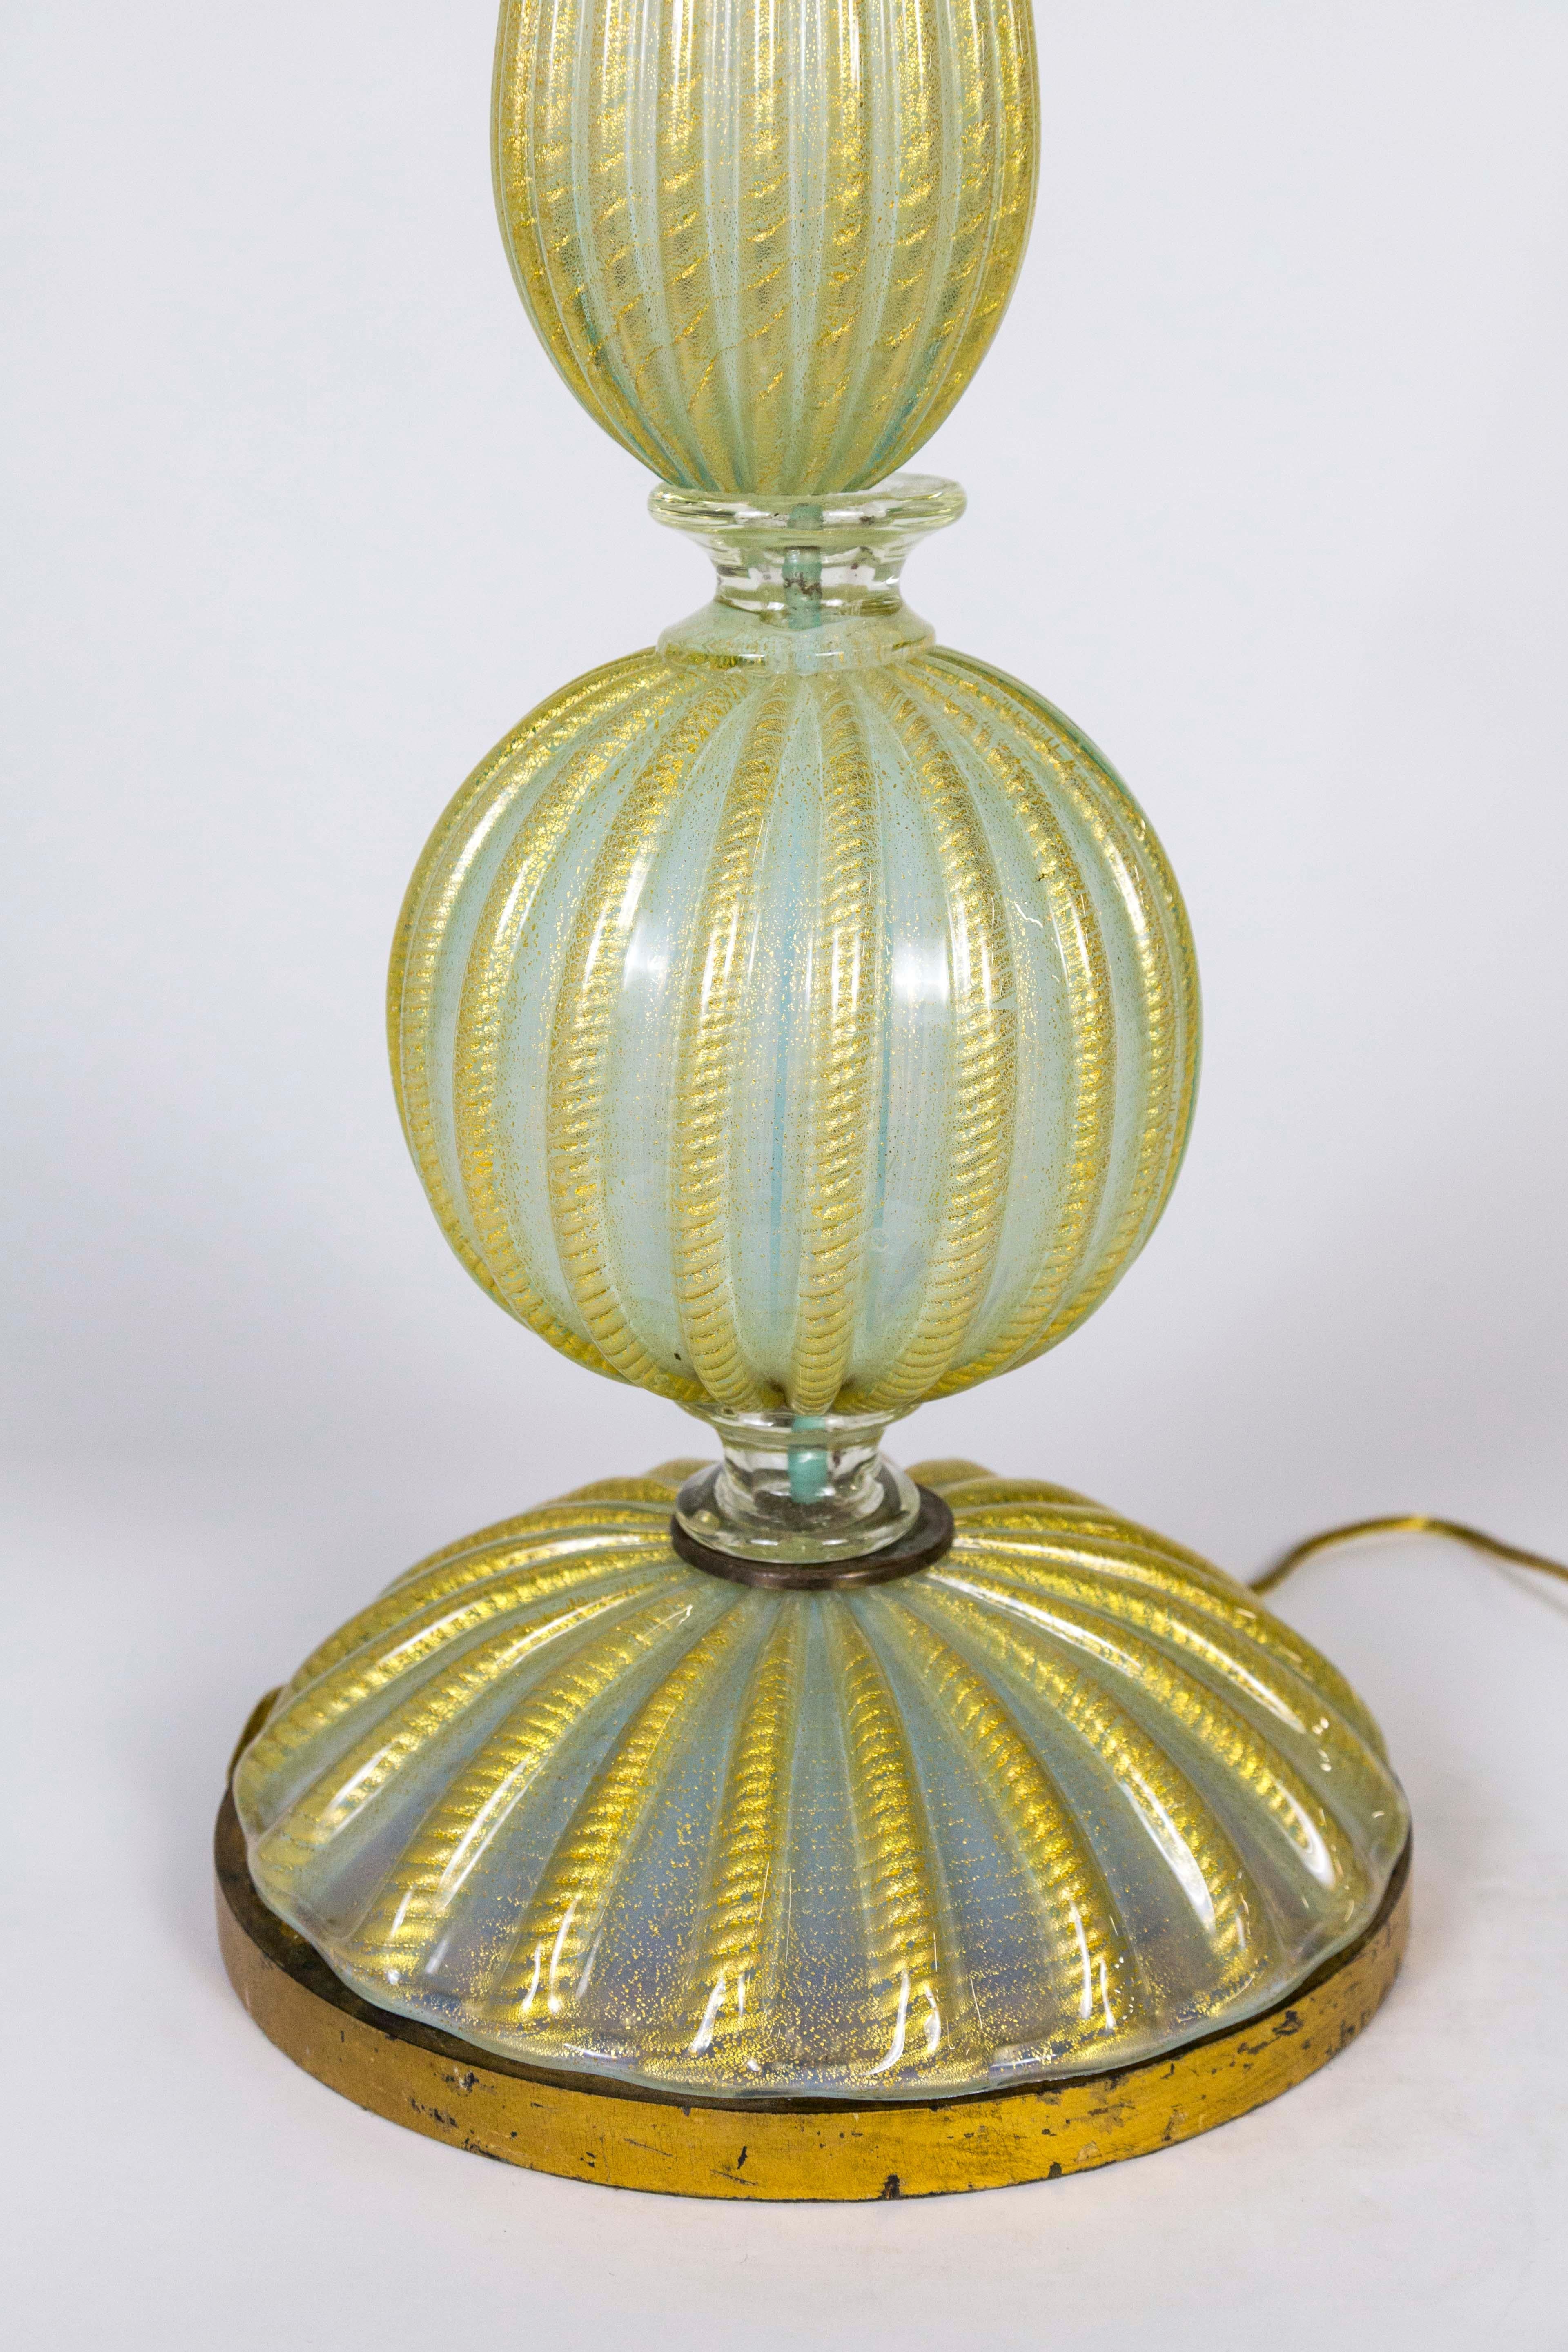 A tall, ribbed, baluster shaped, Venetian glass lamp, in striped yellow and milky, pale blue-green, with a gilded base, 1930s, Italy. Newly rewired. Measures: 38.75